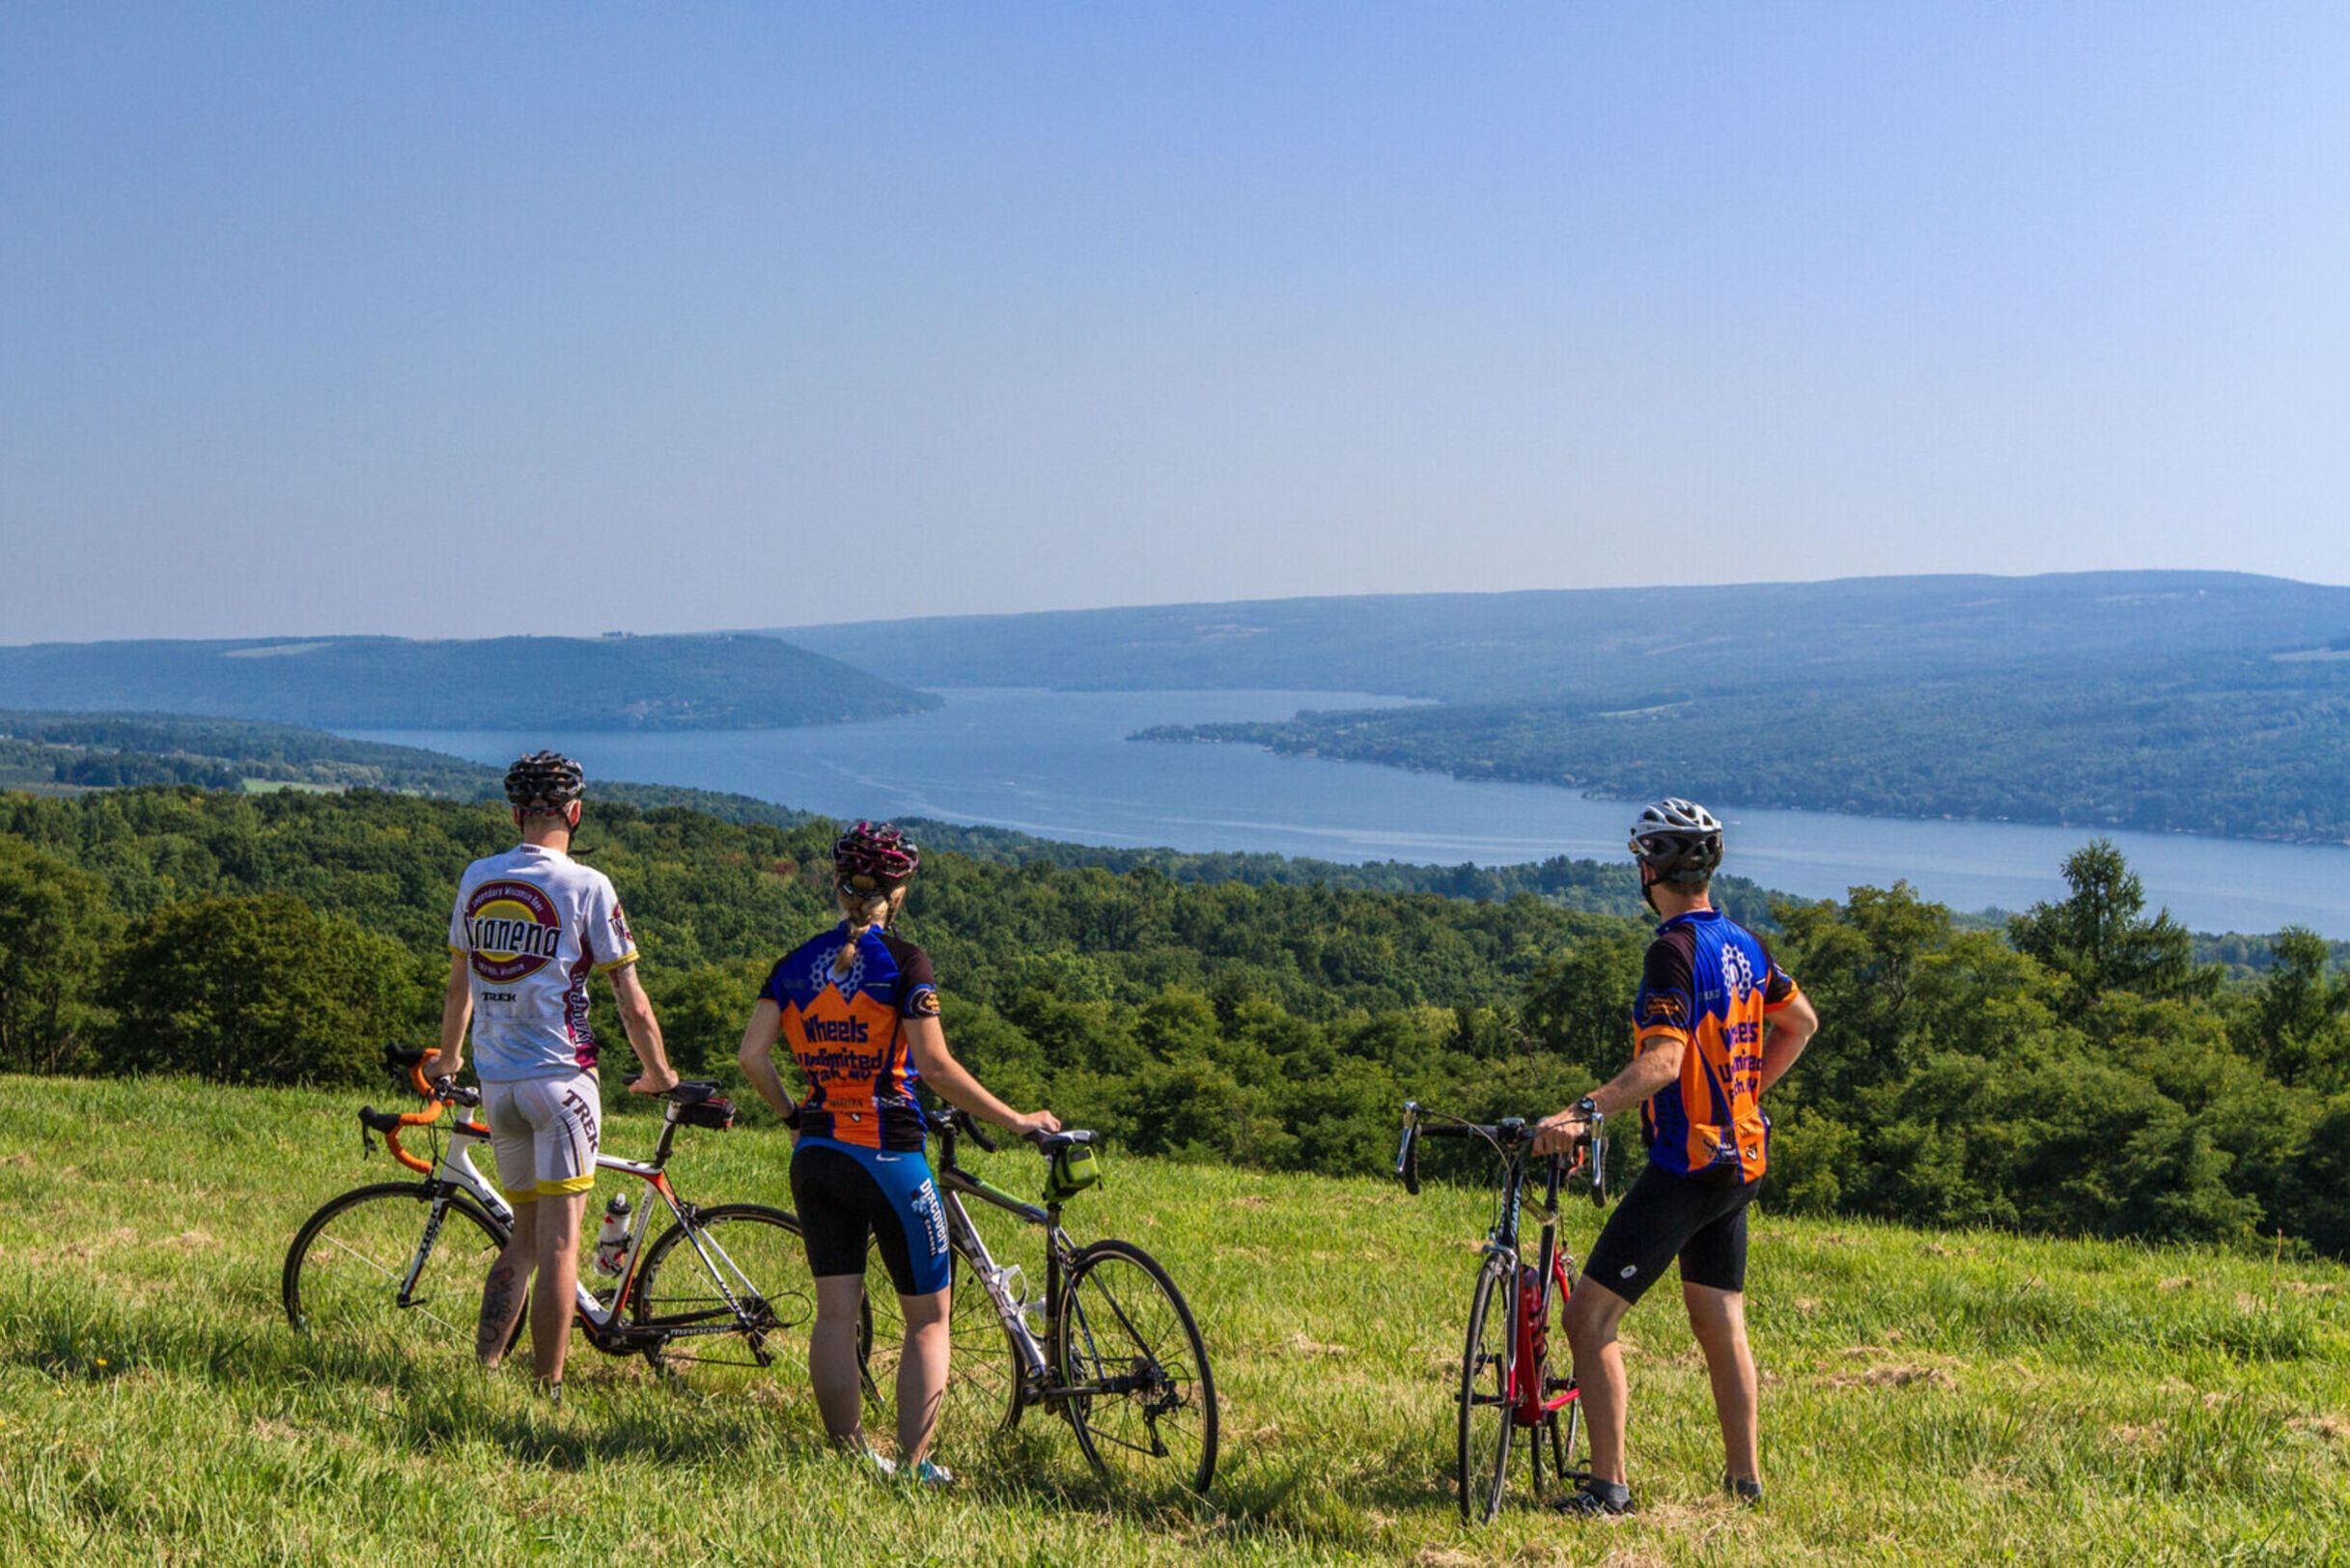 Three cyclists take a break in a a grassy area and look over Keuka Lake